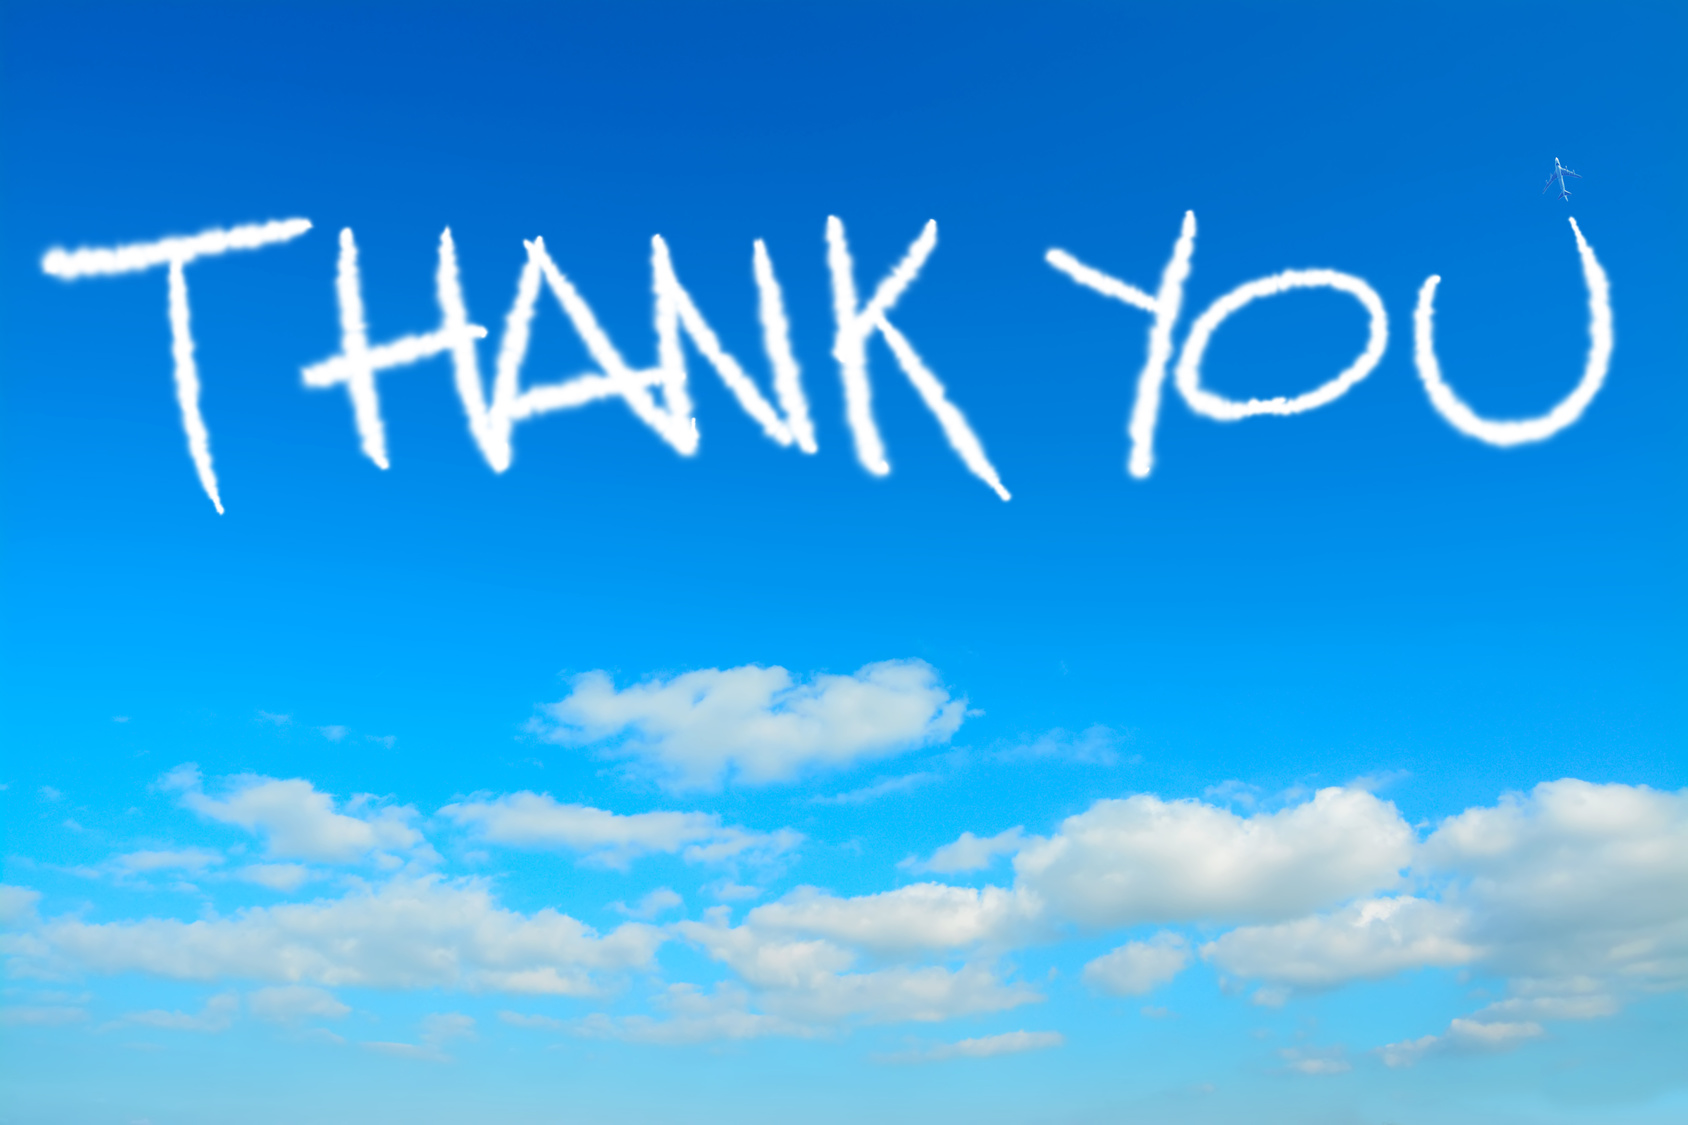 thank you written in the sky